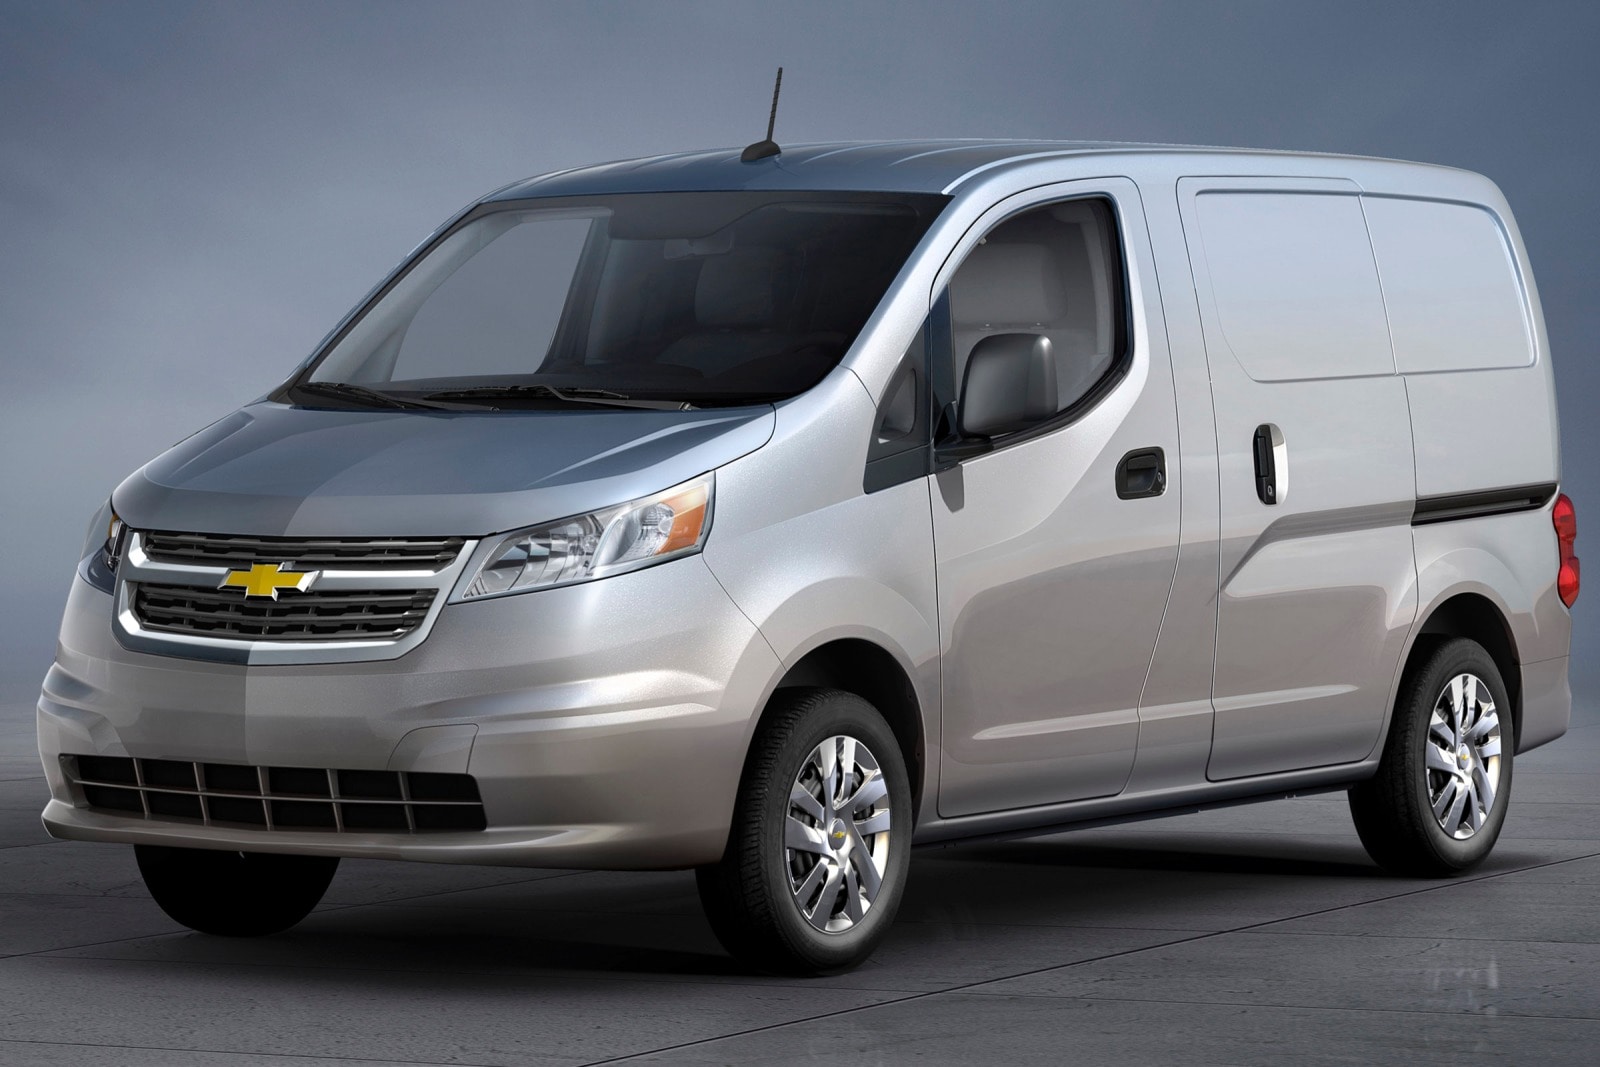 2015 Chevy City Express Review & Ratings | Edmunds